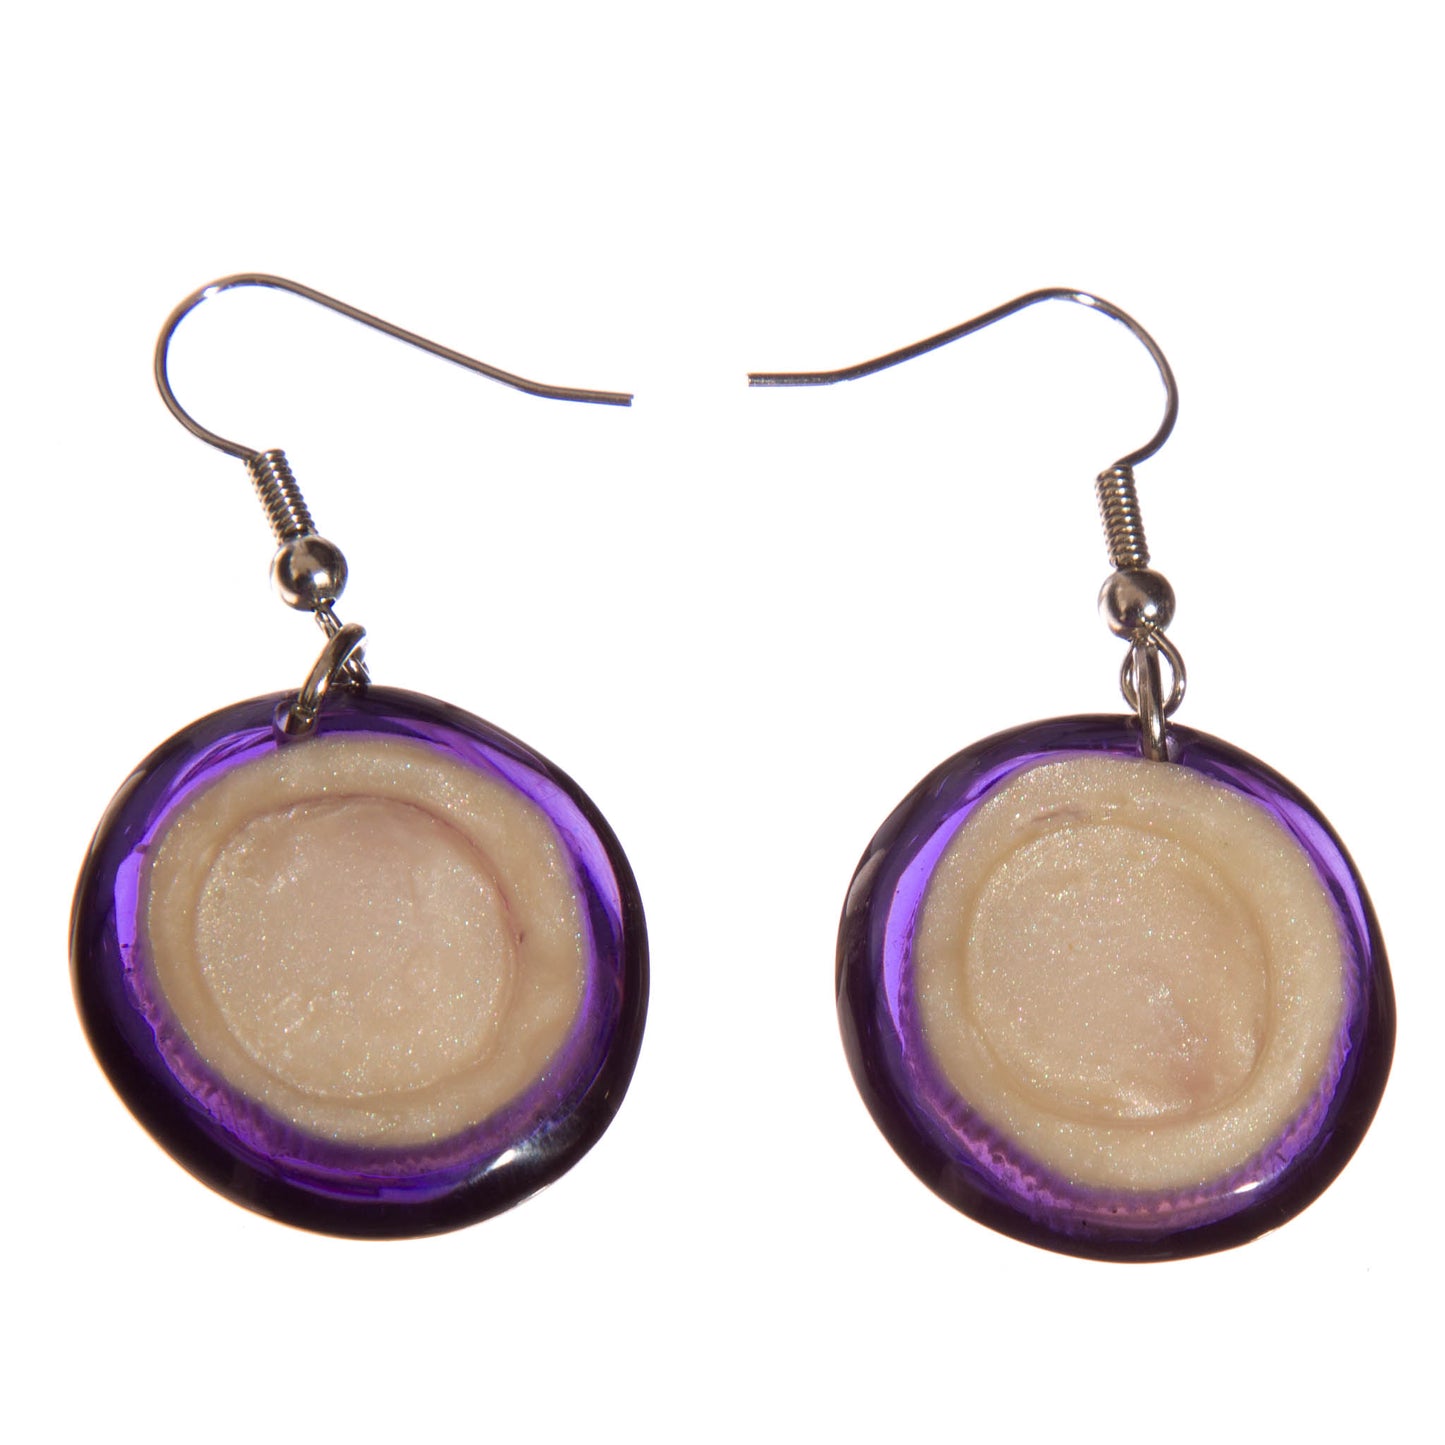 Watch this Space Earrings from the Resin Pebble Collection, Fairground